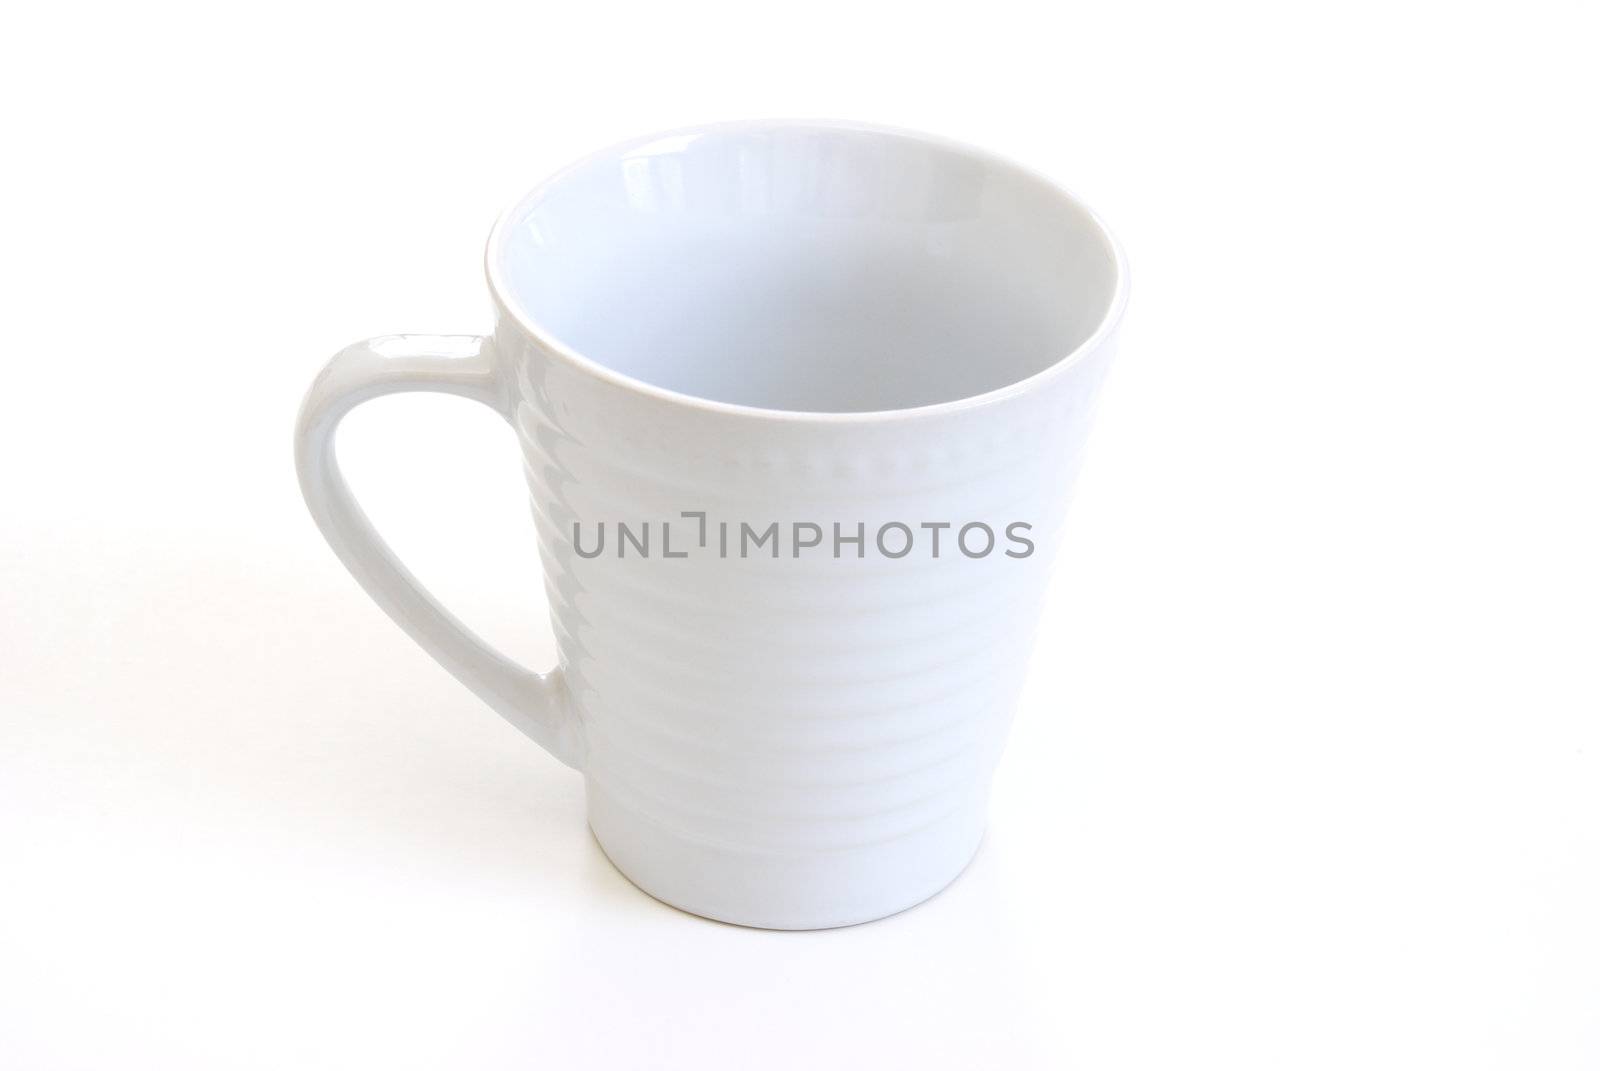 An isolated coffee cup on white background.